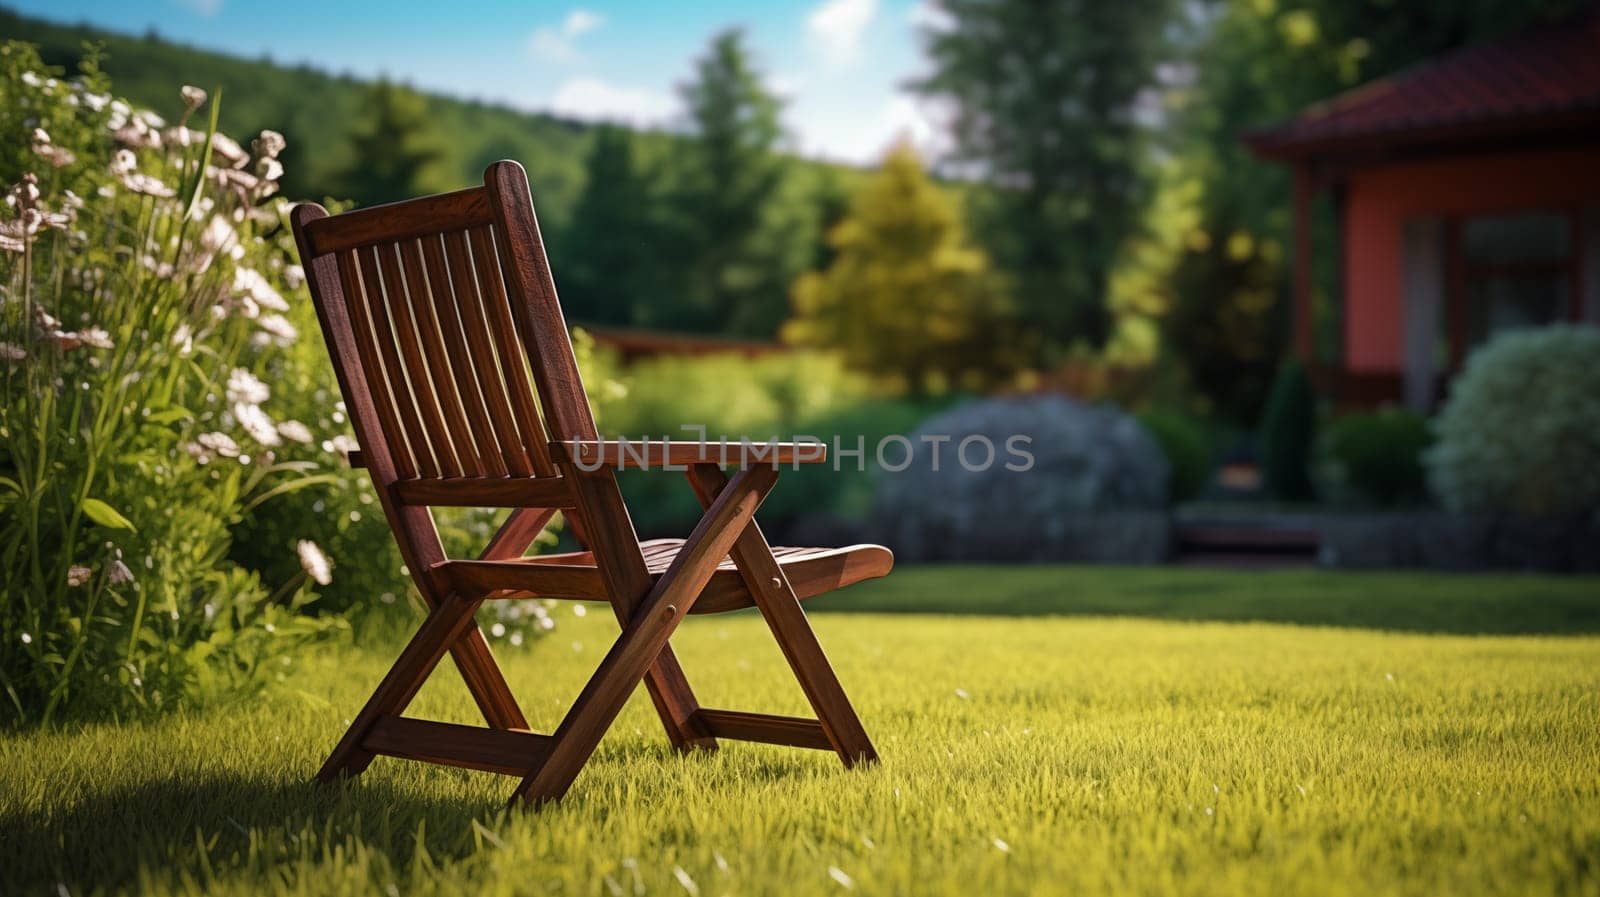 Wooden chair in a blooming garden stands on a bright green neat lawn in the garden.